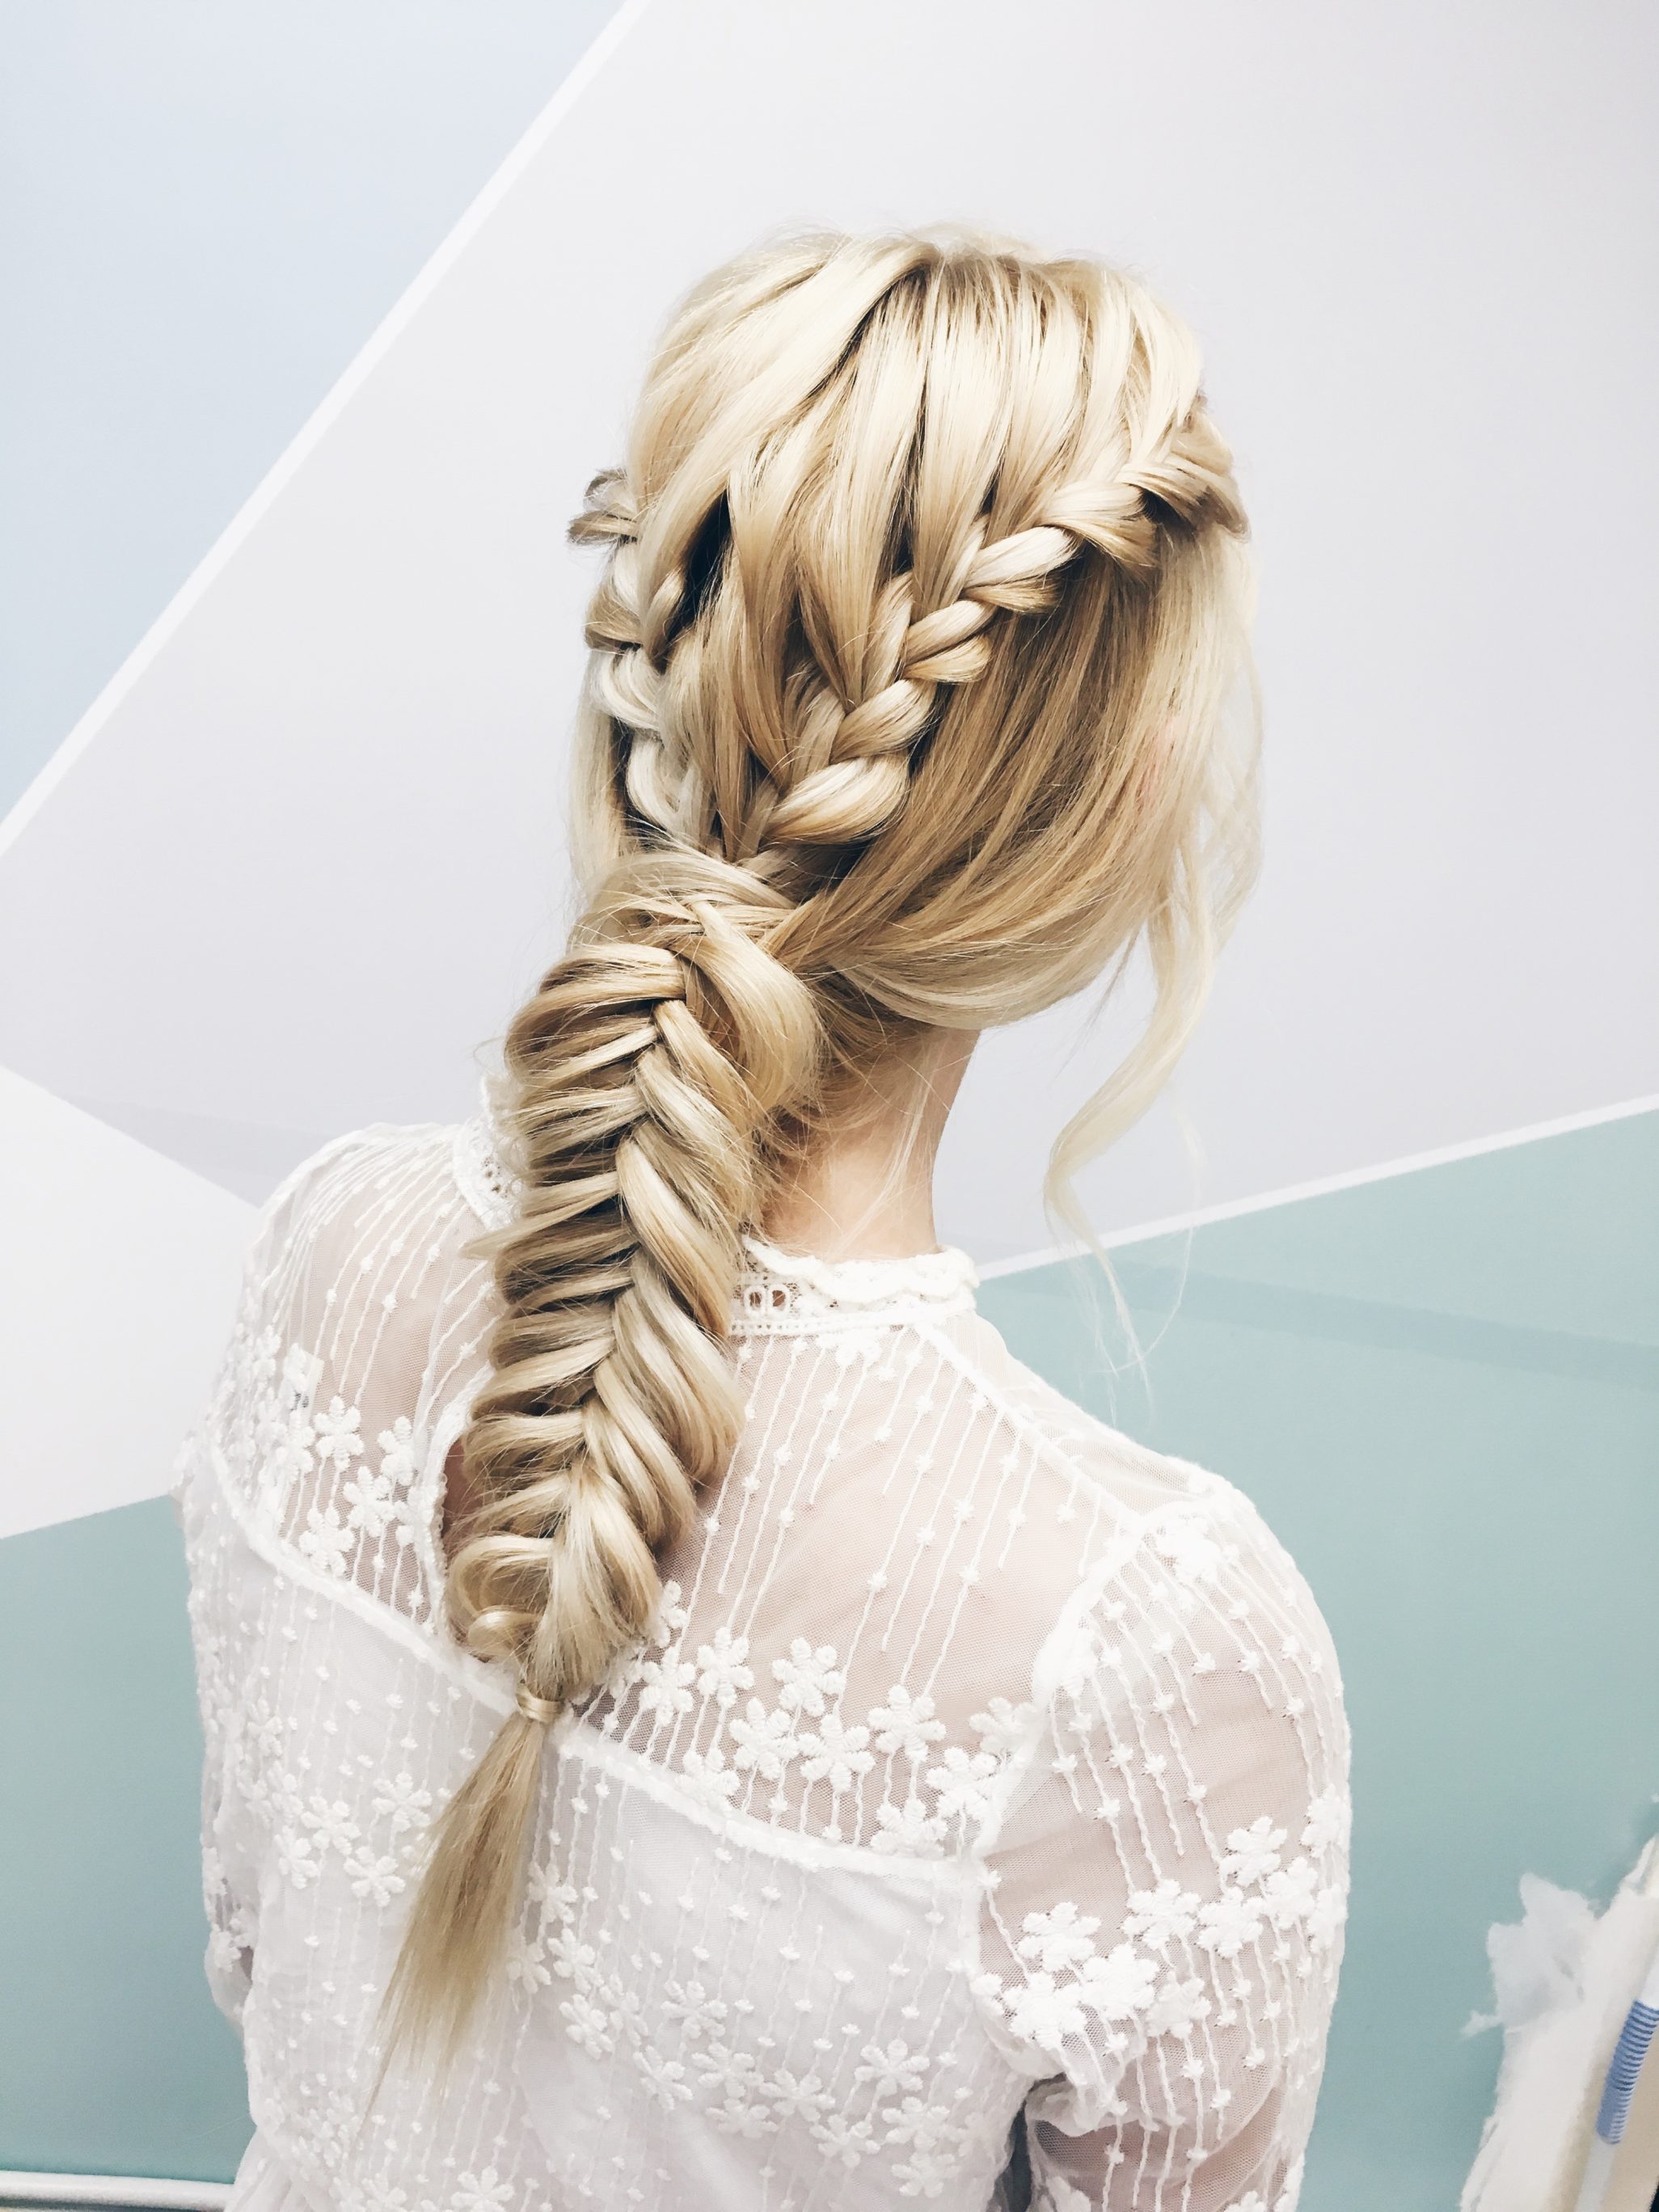 The Blonde Fishtail Hairstyle